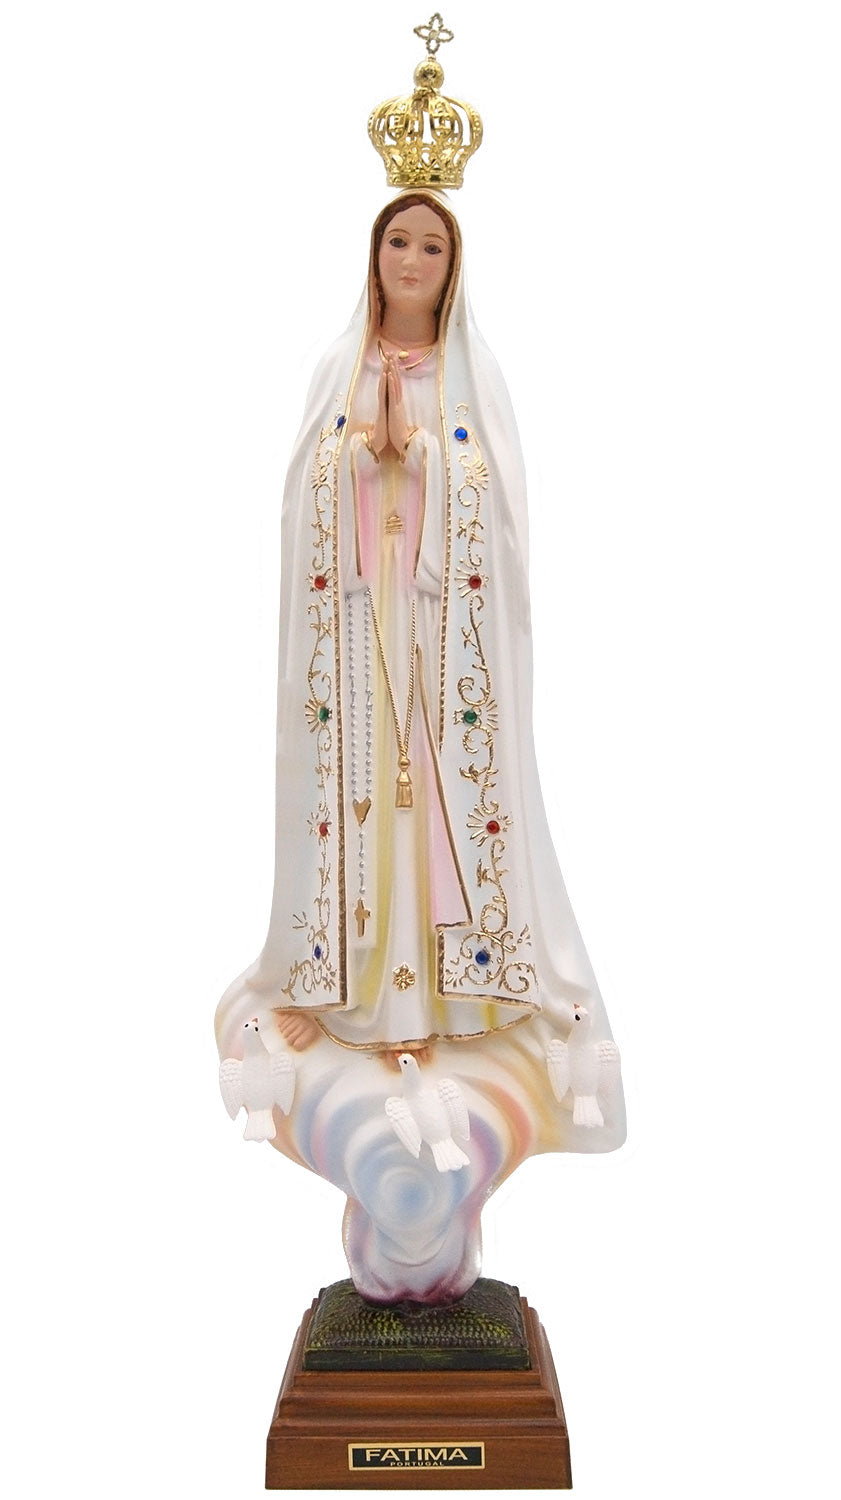 20 Inch Glass Eyes Our Lady of Fatima Statue Made in Portugal